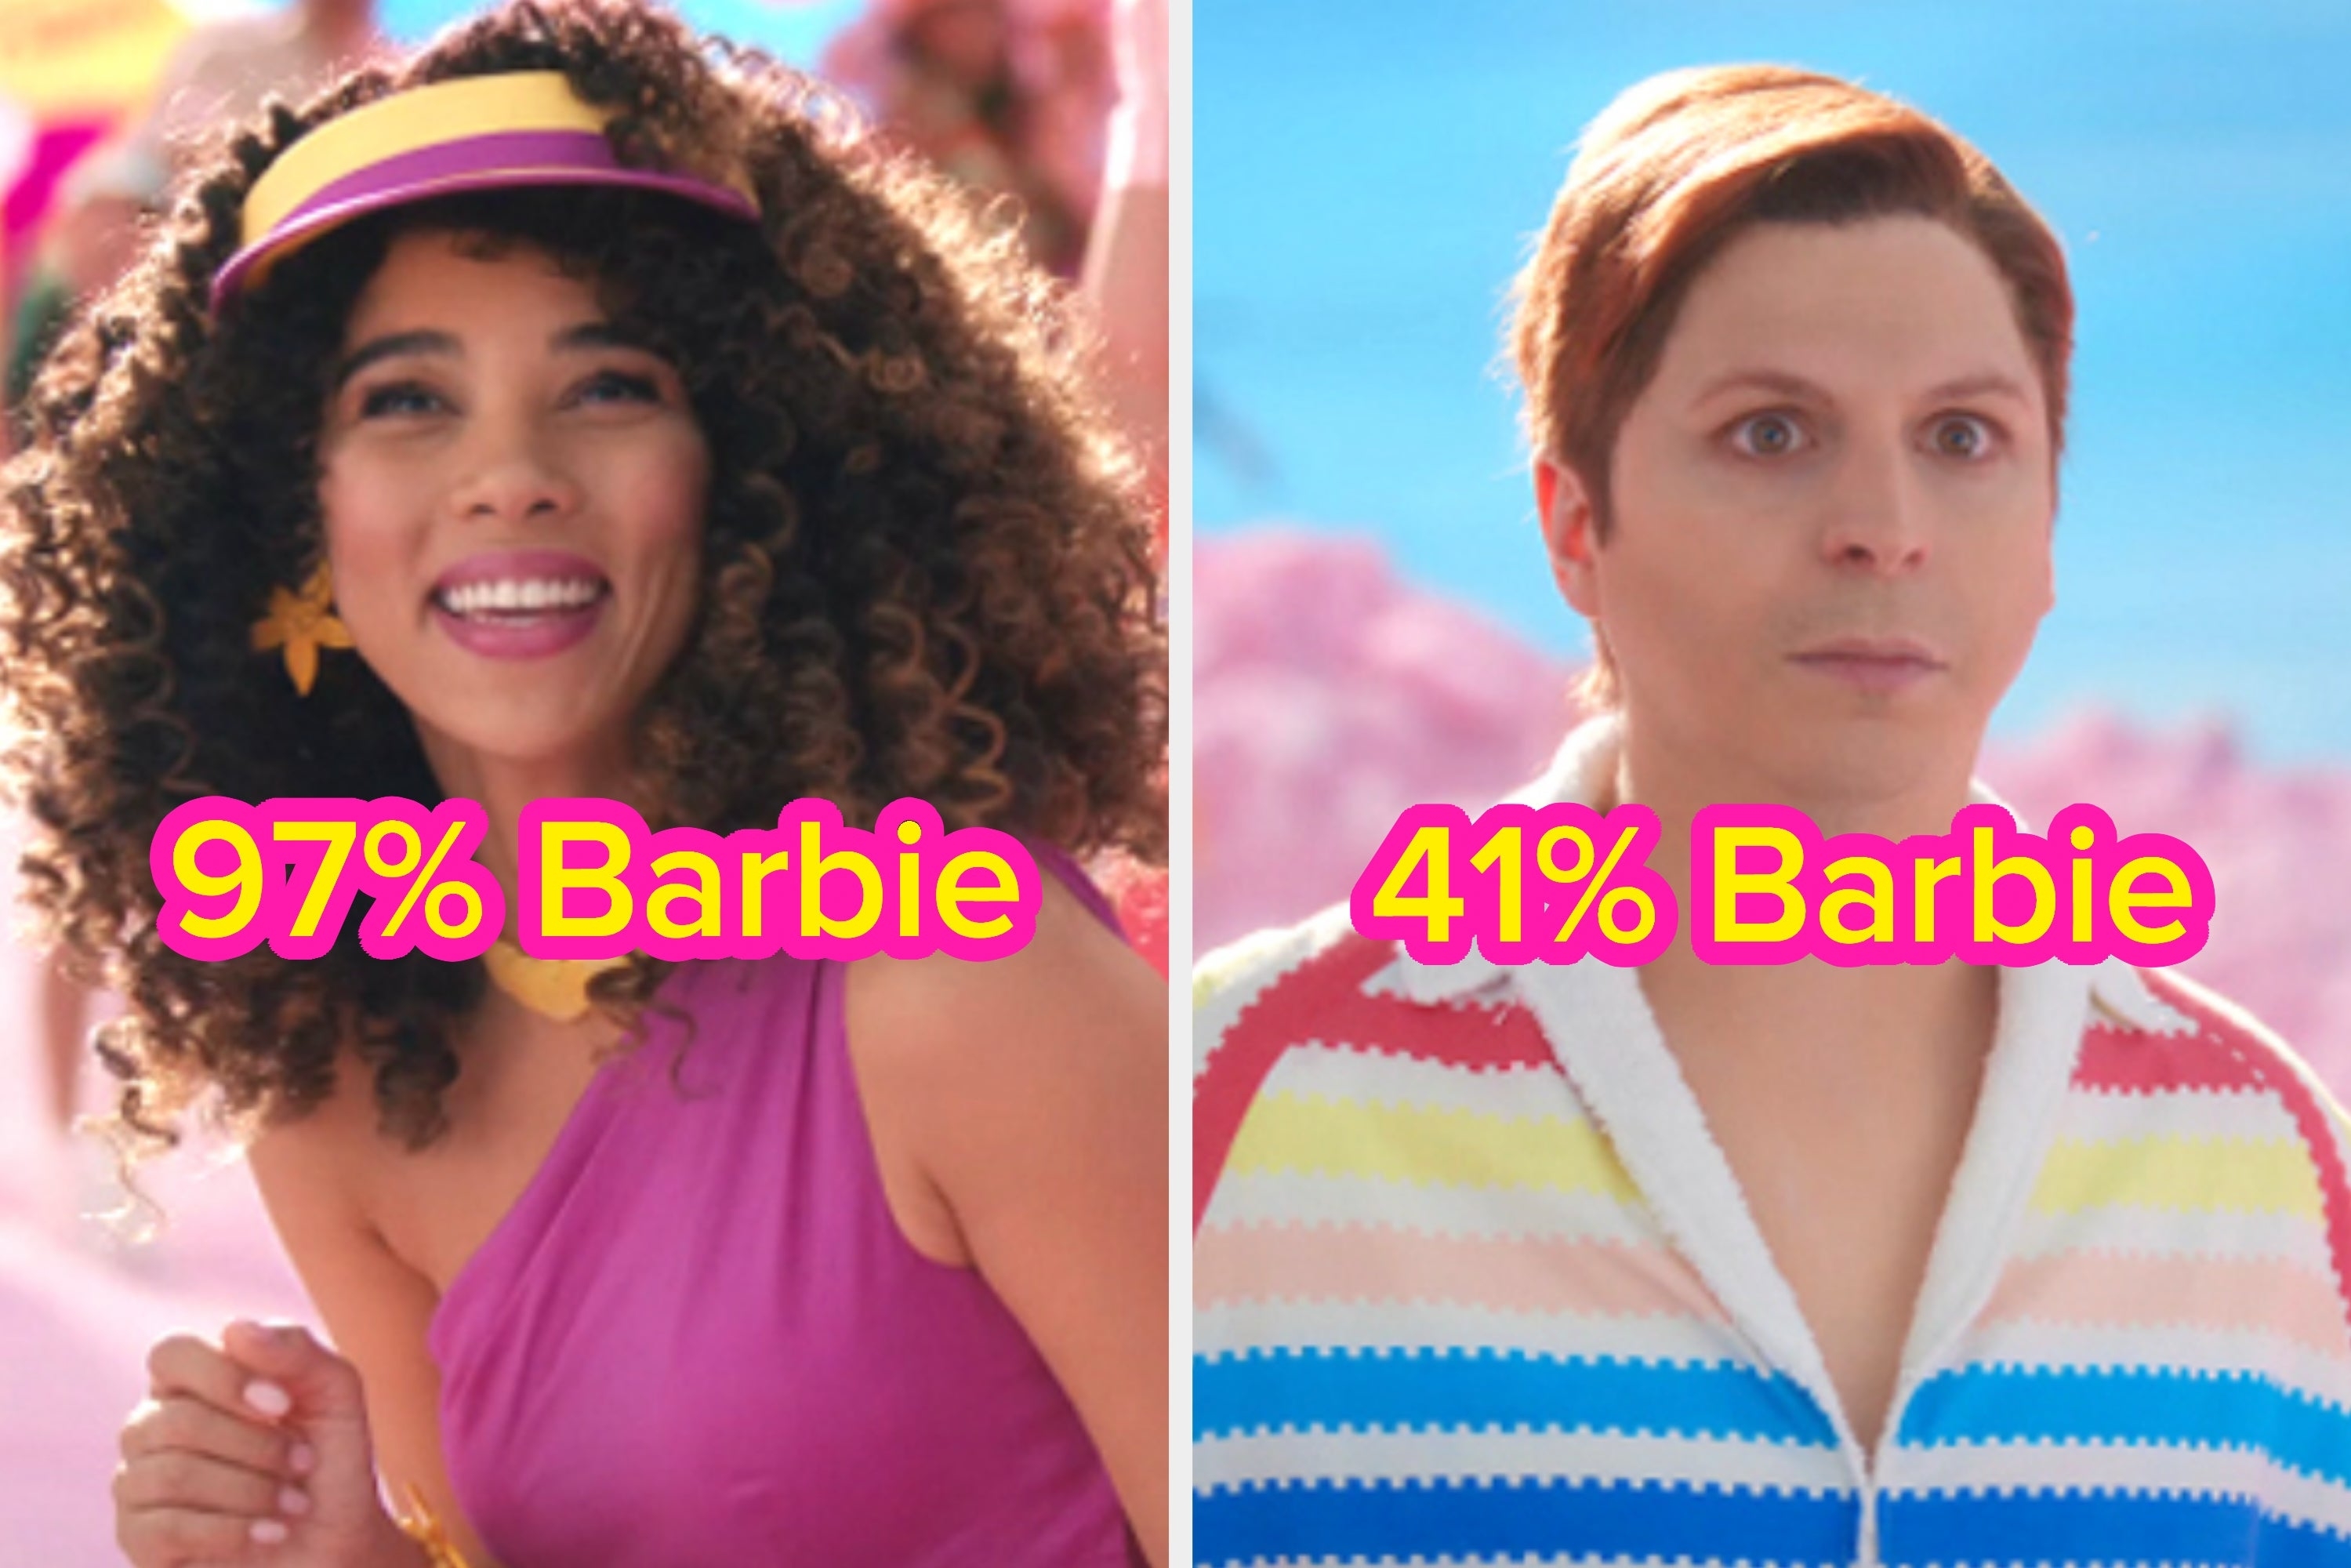 barbie labled as 97% and allen labled as 41%